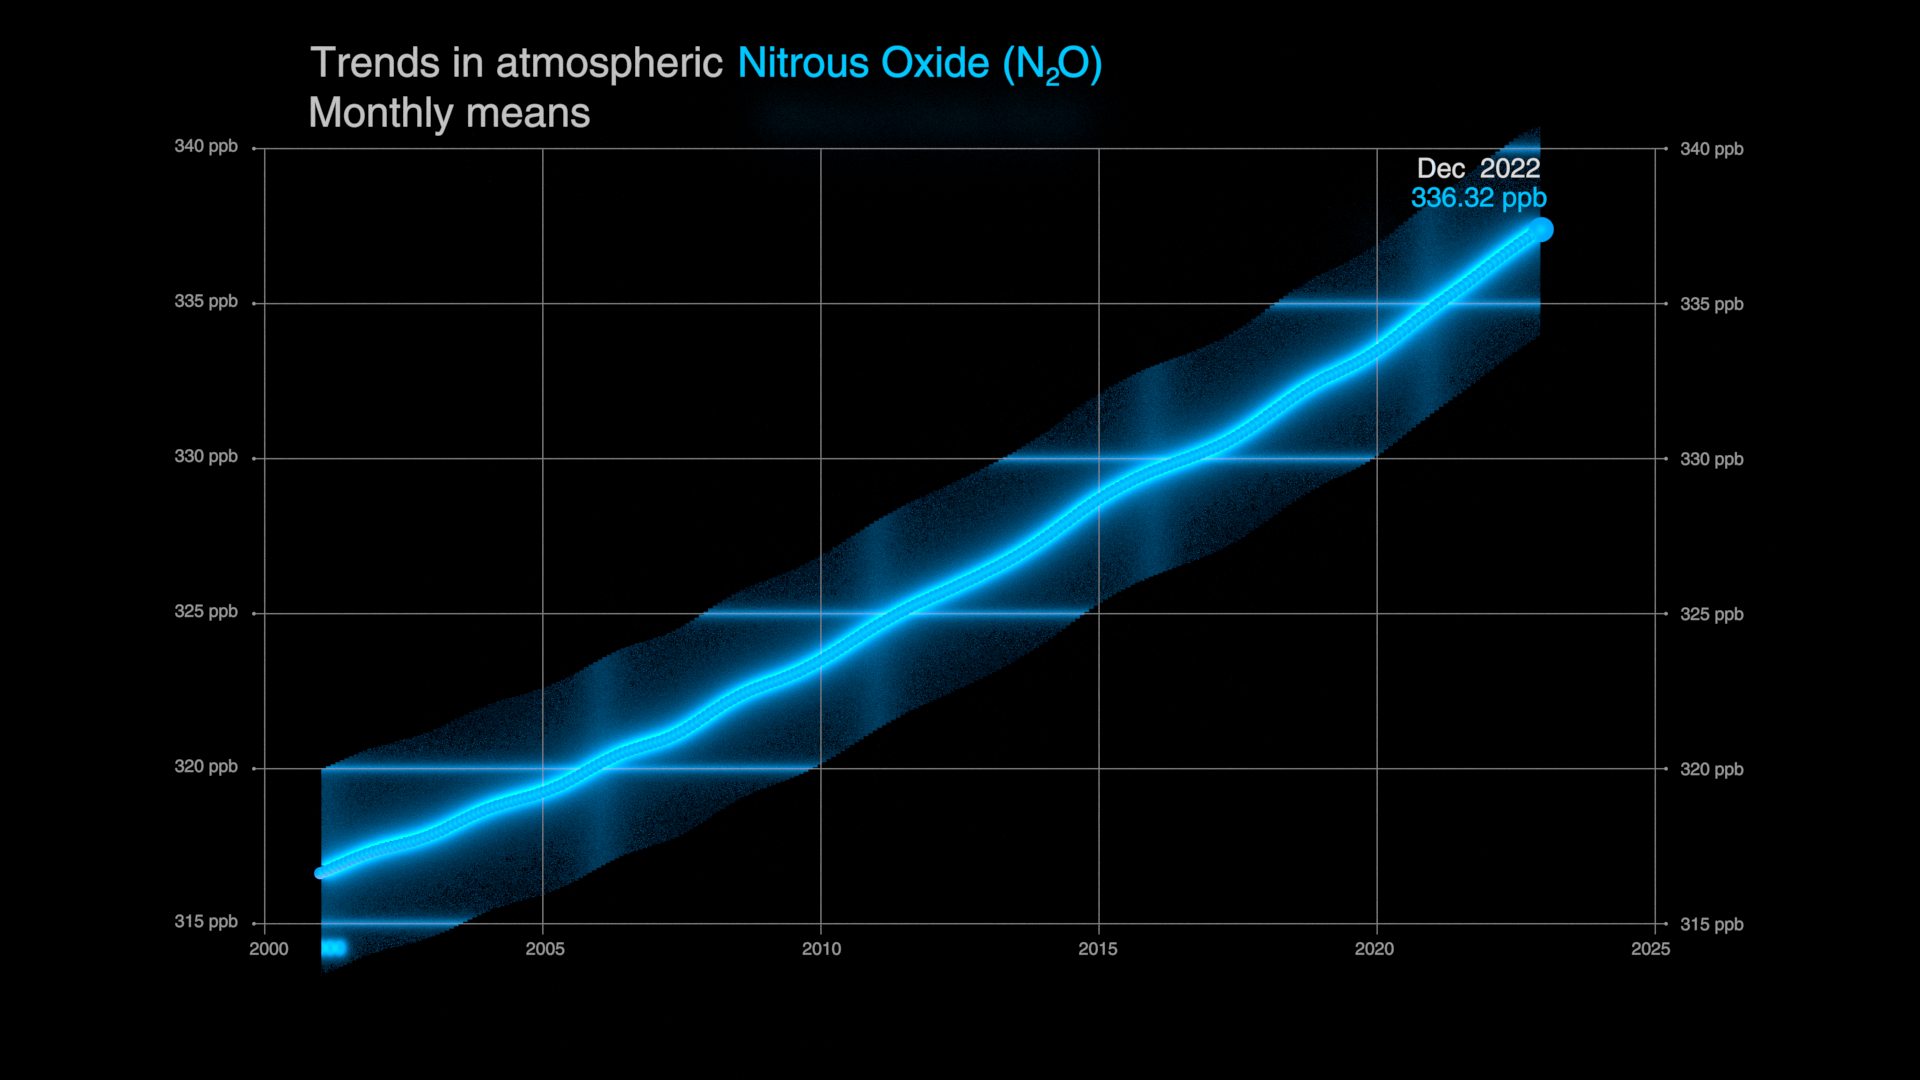 Global trends in atmospheric Nitrous Oxide (N₂O) for the period January 2001-December 2022.